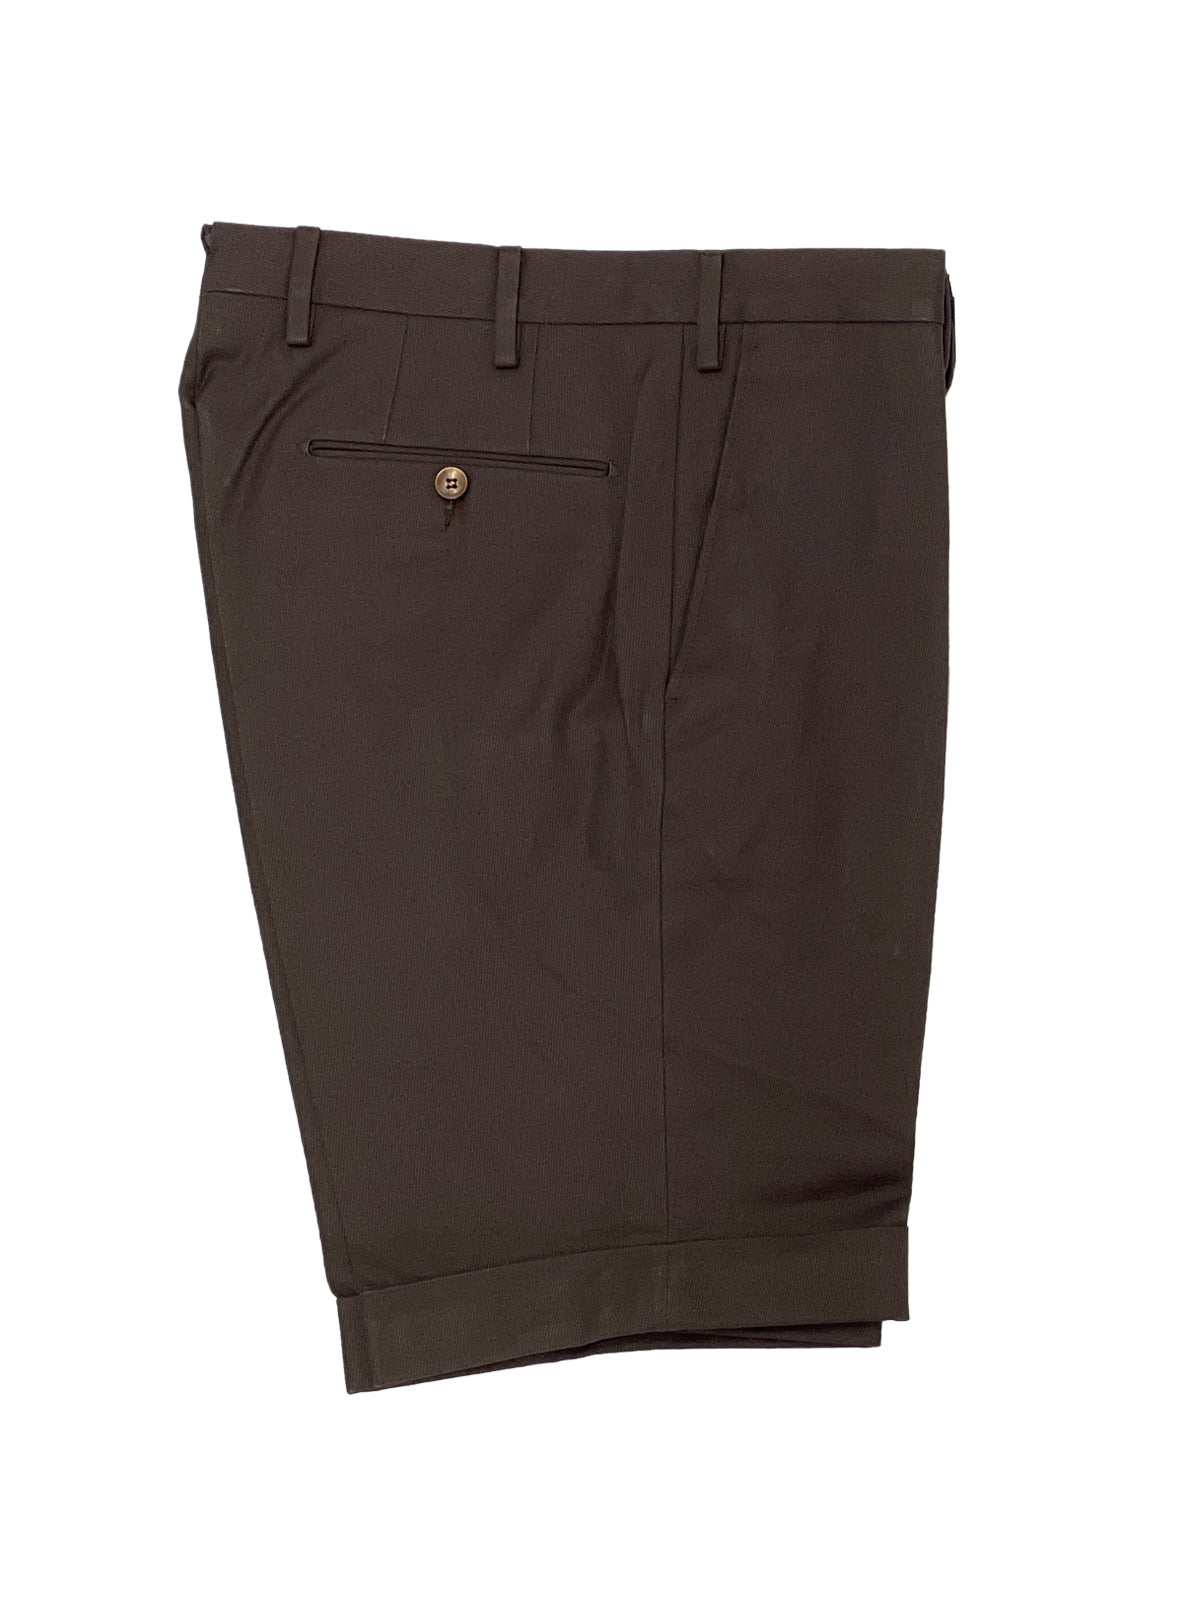 Brown Cotton Cavalry Twill Utility Shorts